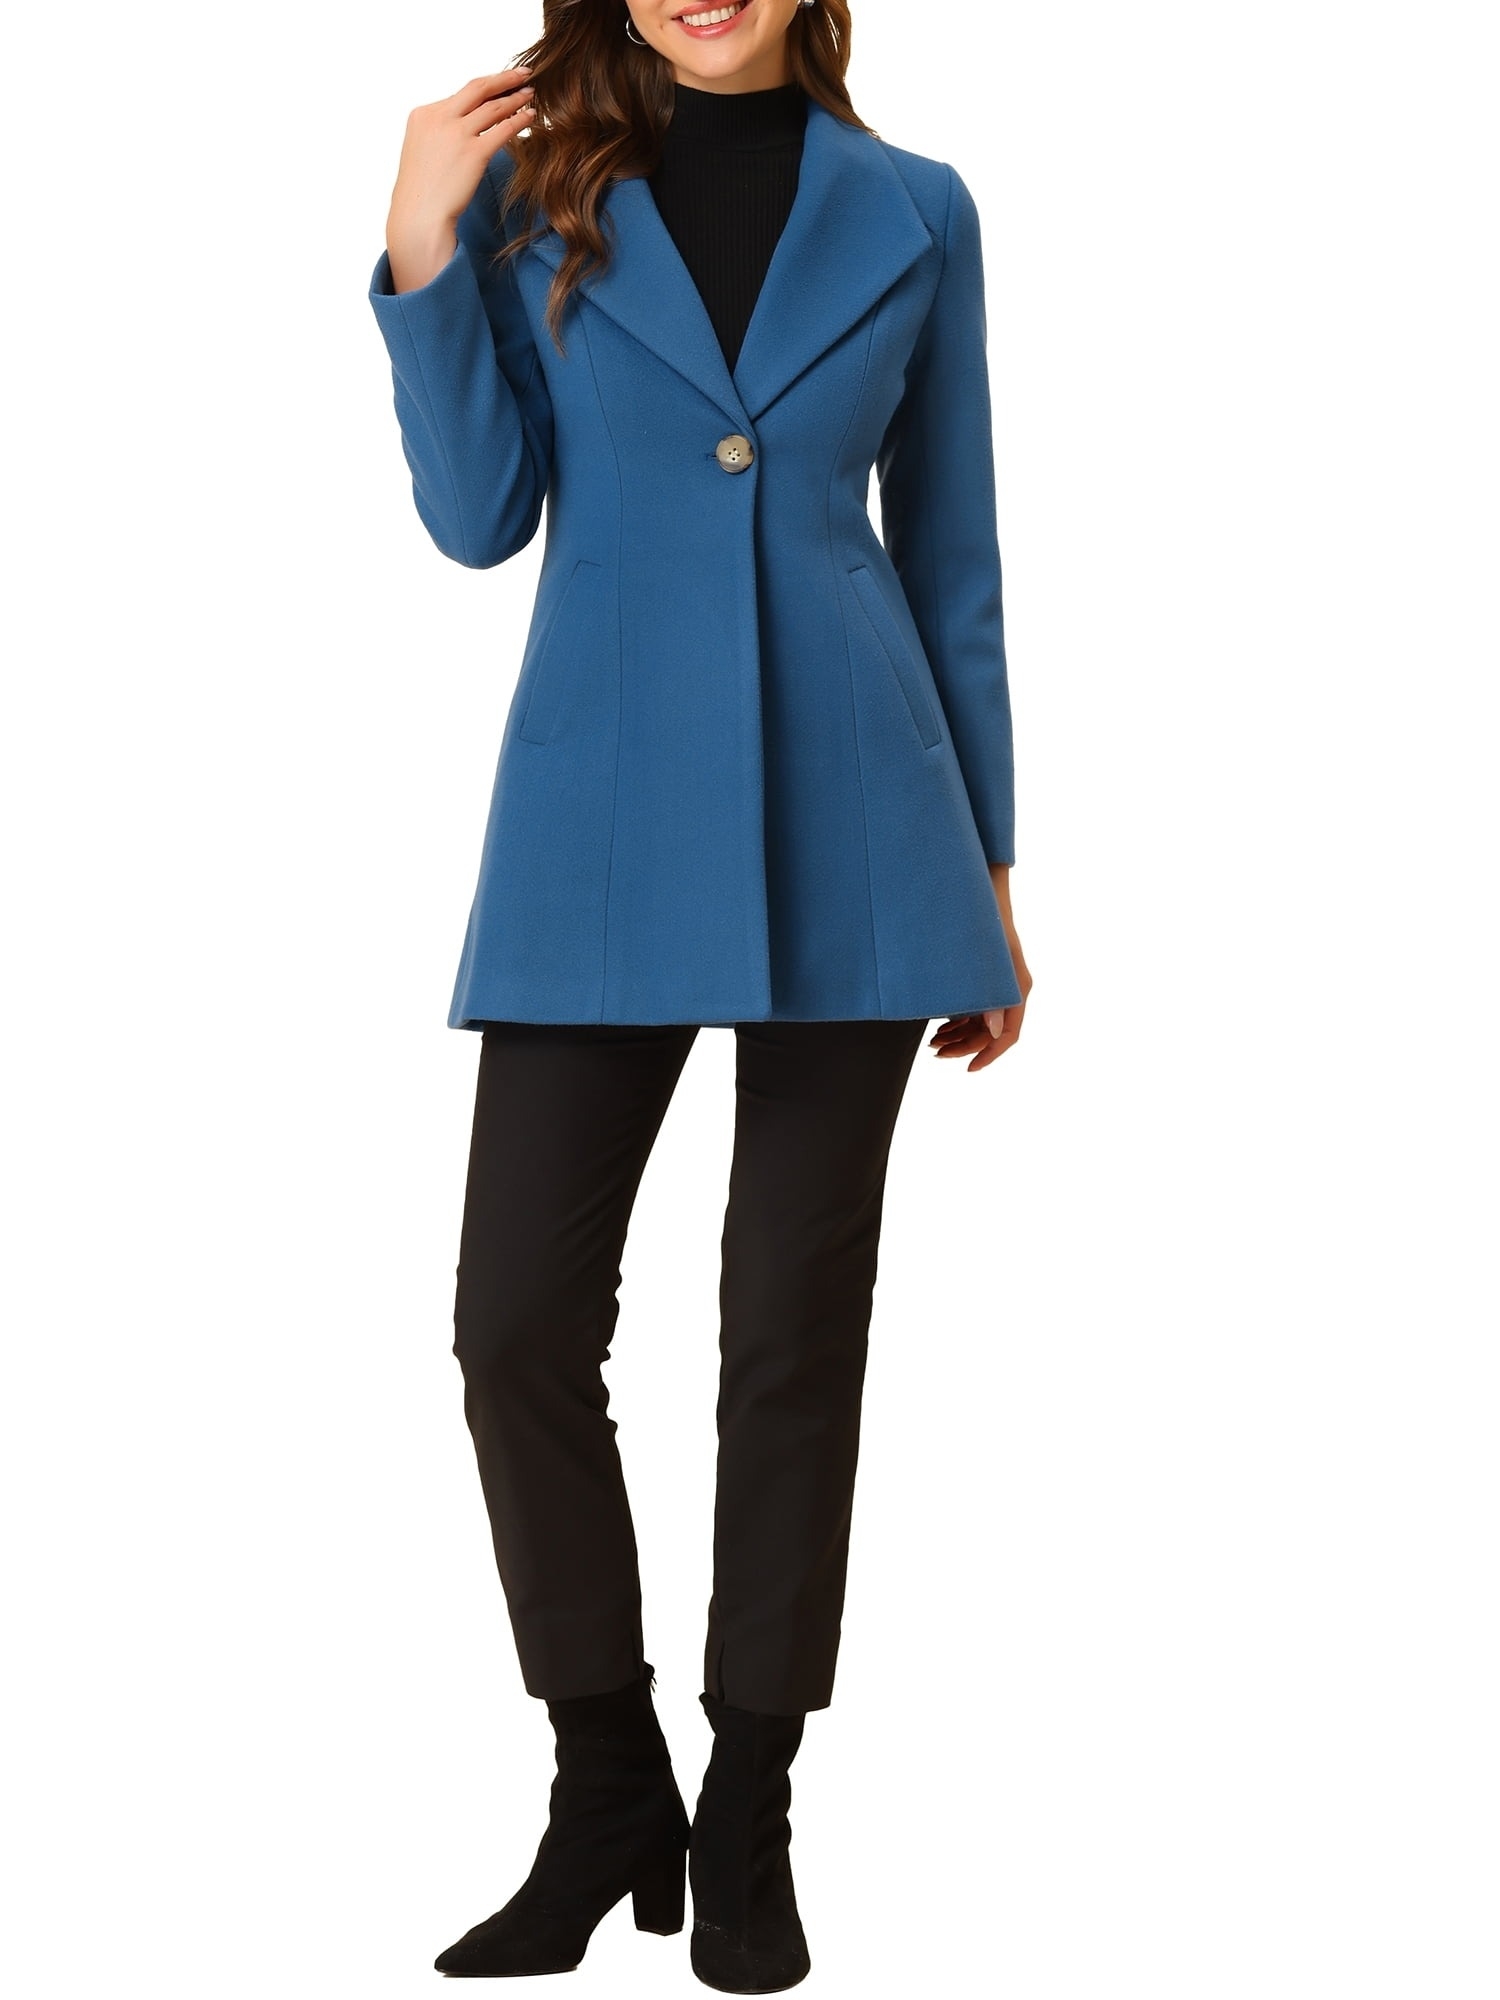 a model in a stylish blue peacoat with a large button, paired with black pants and heeled boots